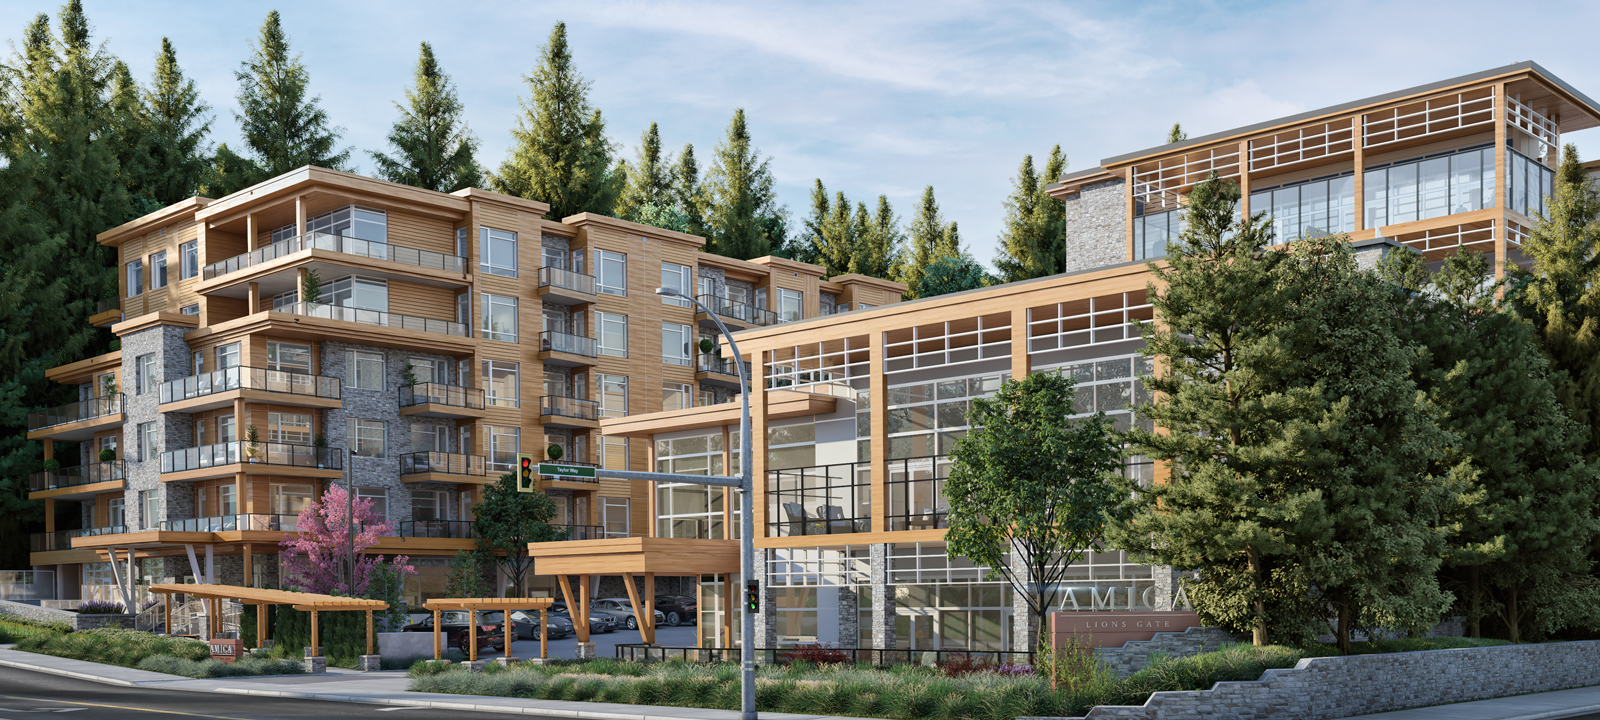 Rendering of the exterior of the Amica Lions Gate expansion project.